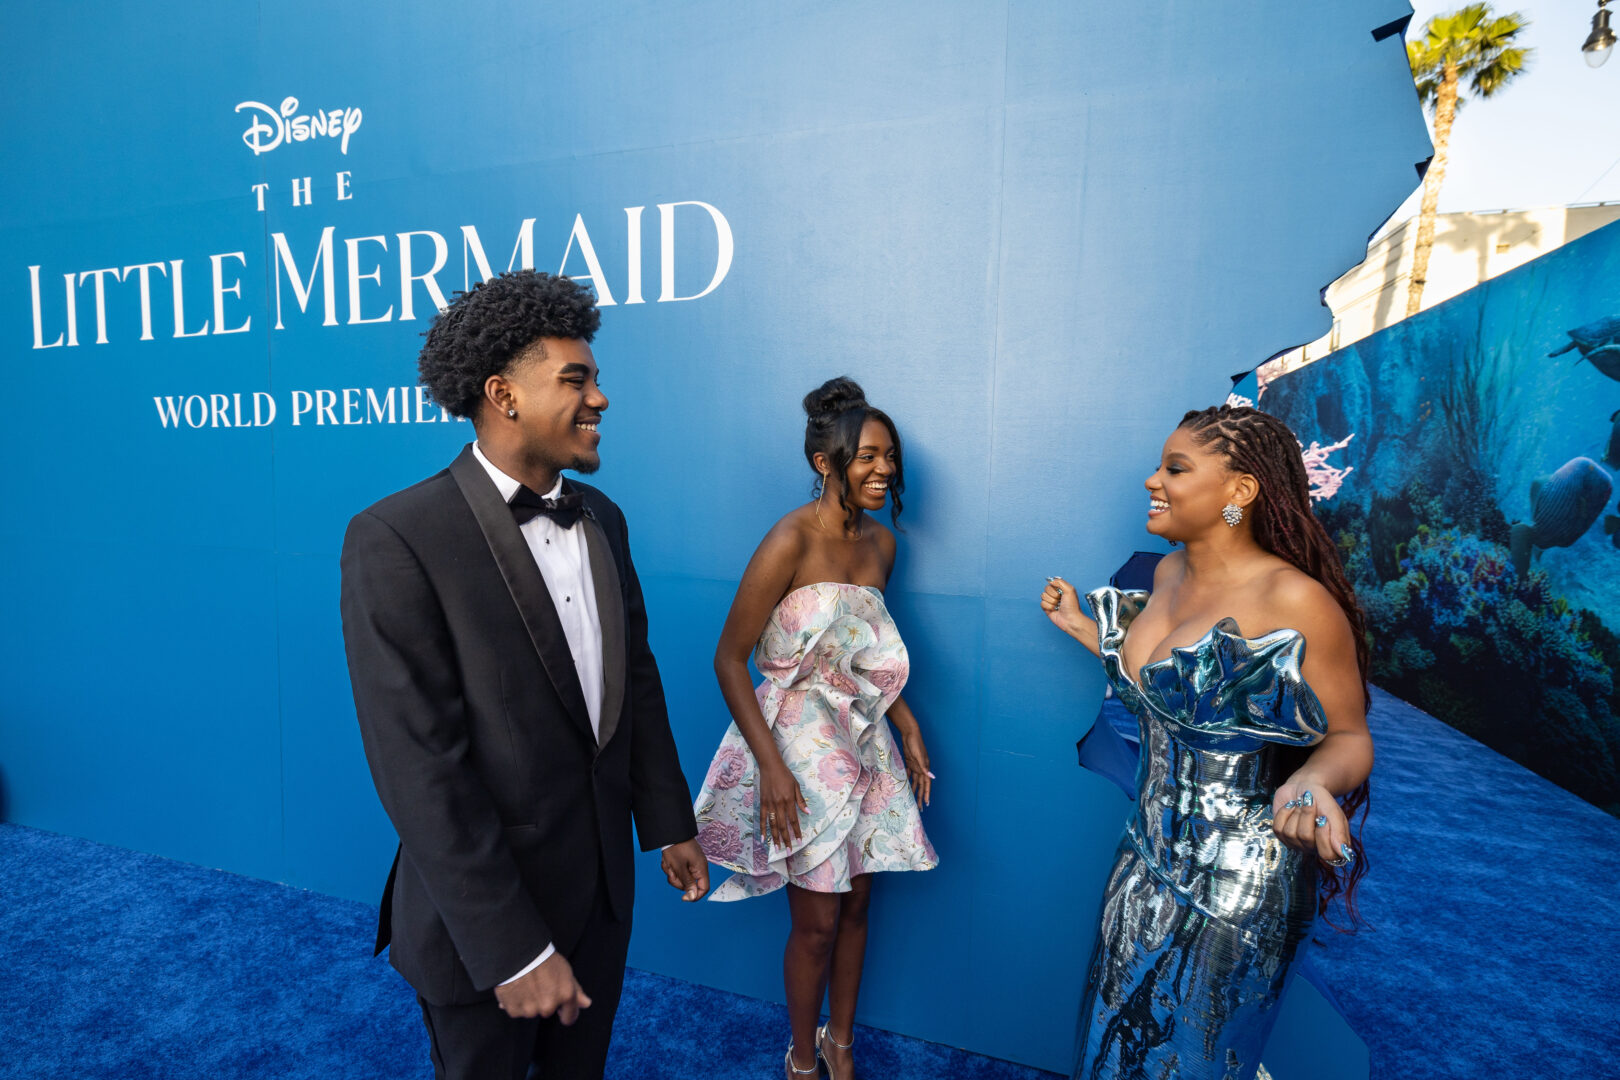 Halle Bailey Makes Dreams Come True for Two Aspiring Filmmakers at Disney’s Live-Action ‘The Little Mermaid’ World Premiere